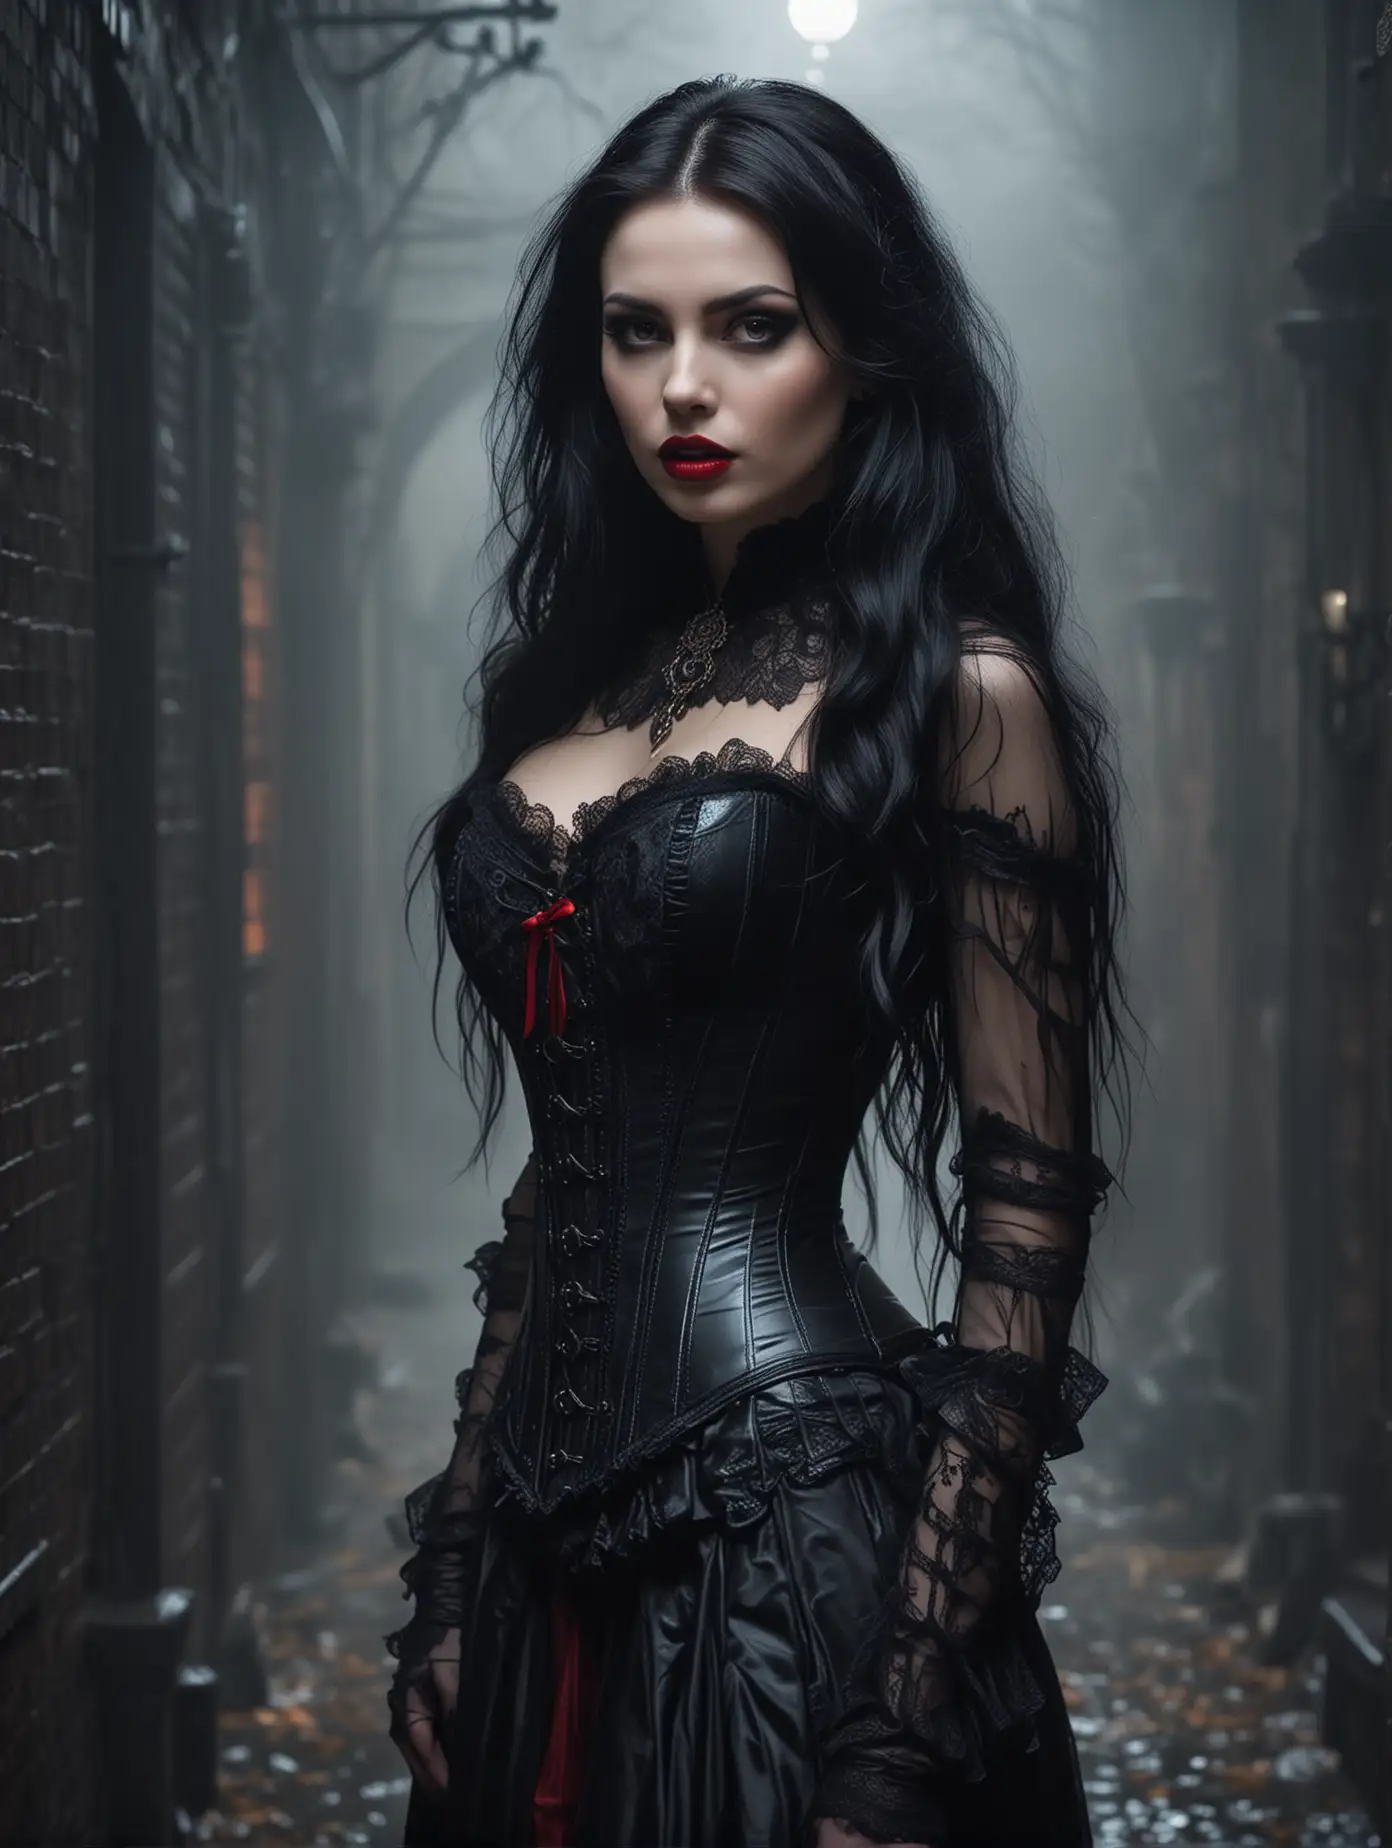 a gothic vampire woman cloaked in the mystery of the night. She wears a tightly laced latex corset, accentuating her ethereal form. Her eyes are a dramatic smokey black, contrasting starkly with her vivid red lipstick that seems to hold the essence of life itself. Her long black hair cascades down her back, whispering secrets of ancient times. The backdrop is a dimly lit, foggy Victorian alley, enhancing her mysterious allure. This scene captures the essence of gothic elegance and vampiric mystique.